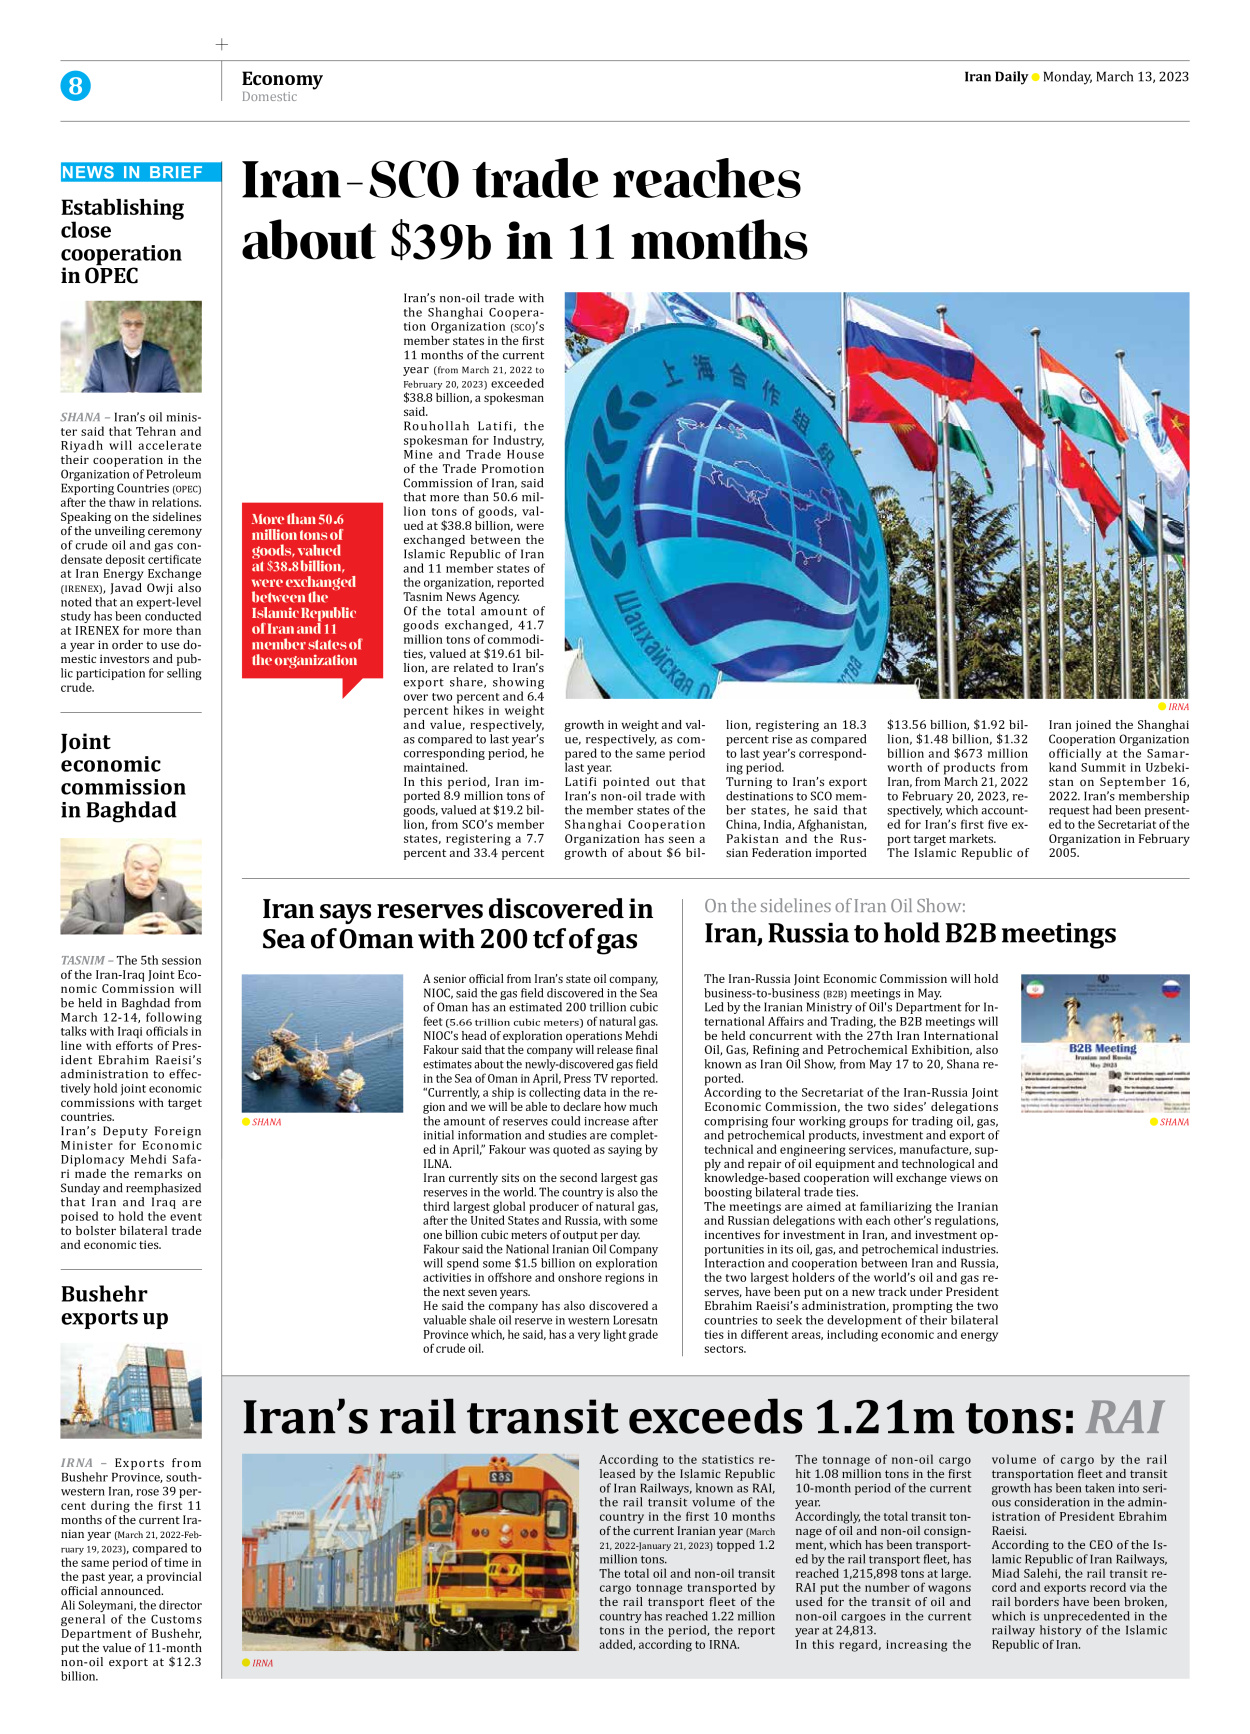 Iran Daily - Number Seven Thousand Two Hundred and Fifty Six - 13 March 2023 - Page 8